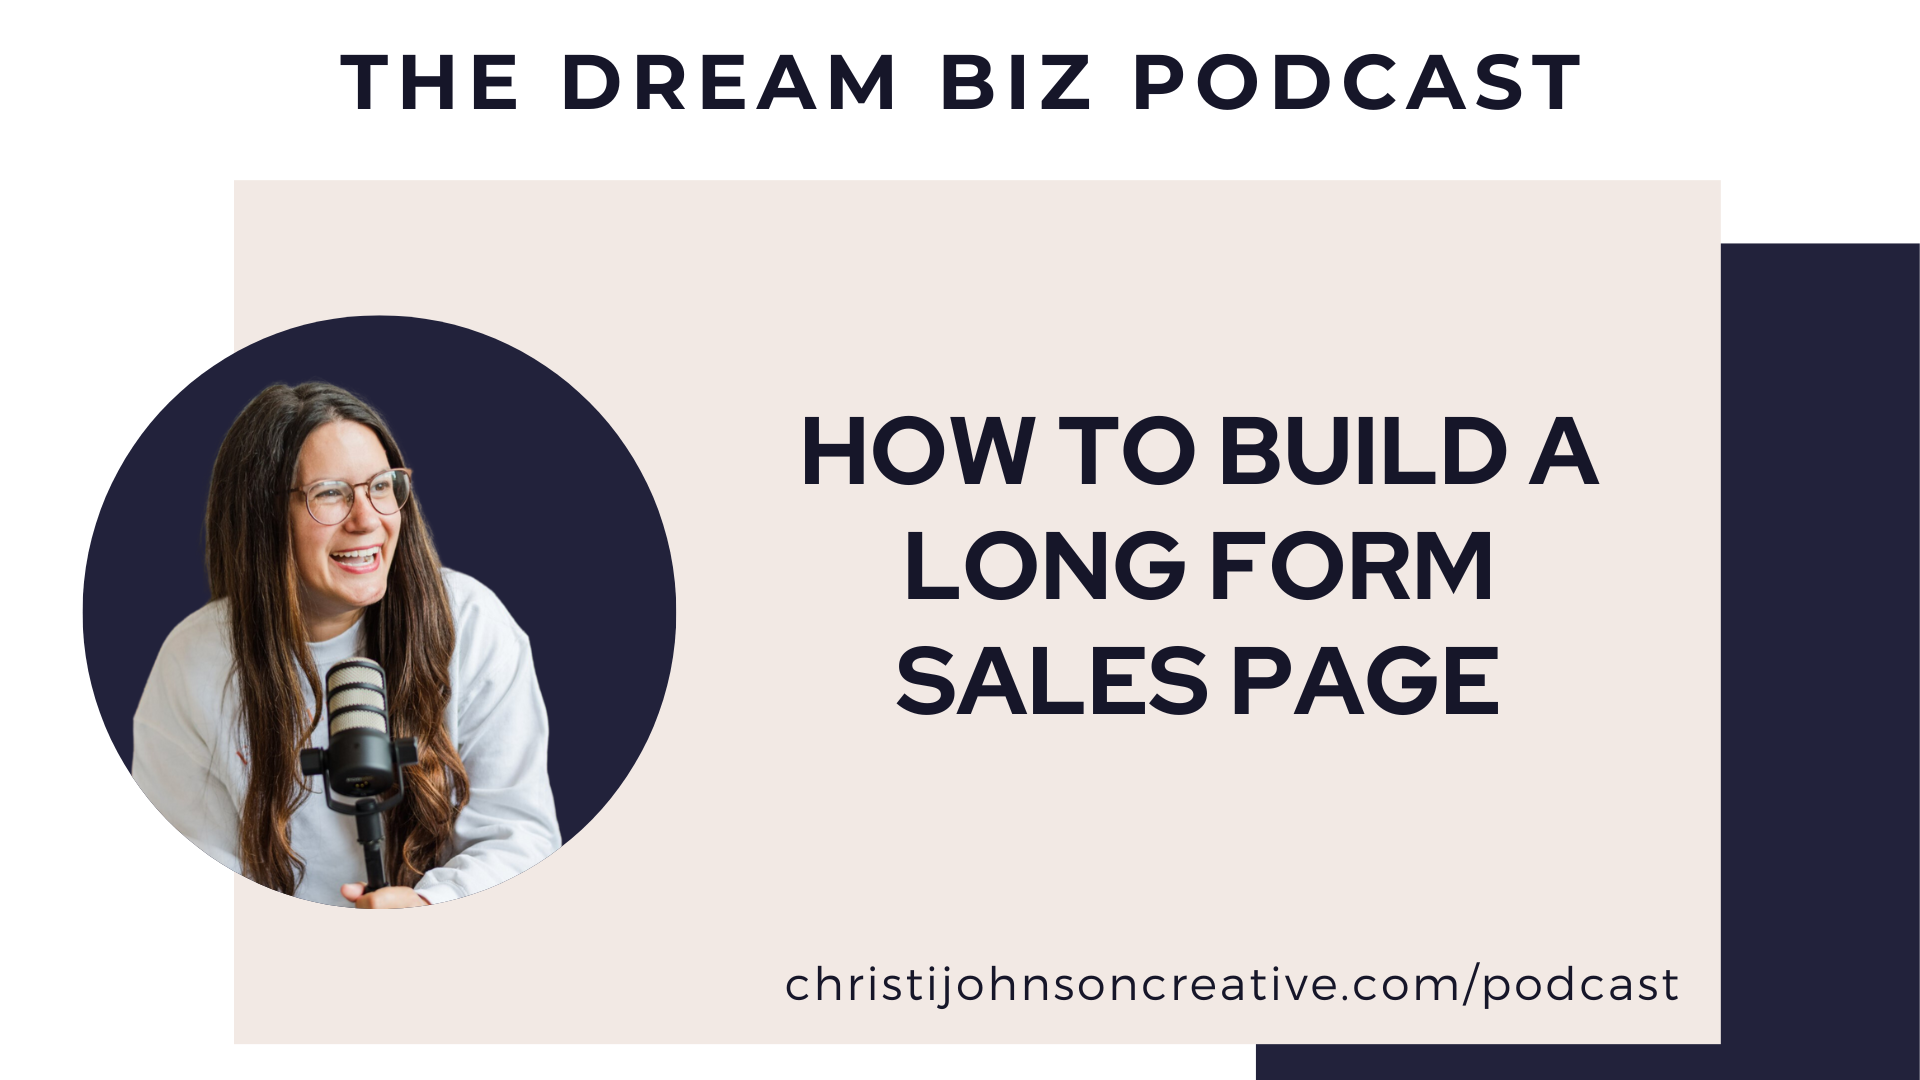 How to build a long form sales page is written in purple text on a tan background. Christi is smiling off to her right holding a microphone against a dark purple background.